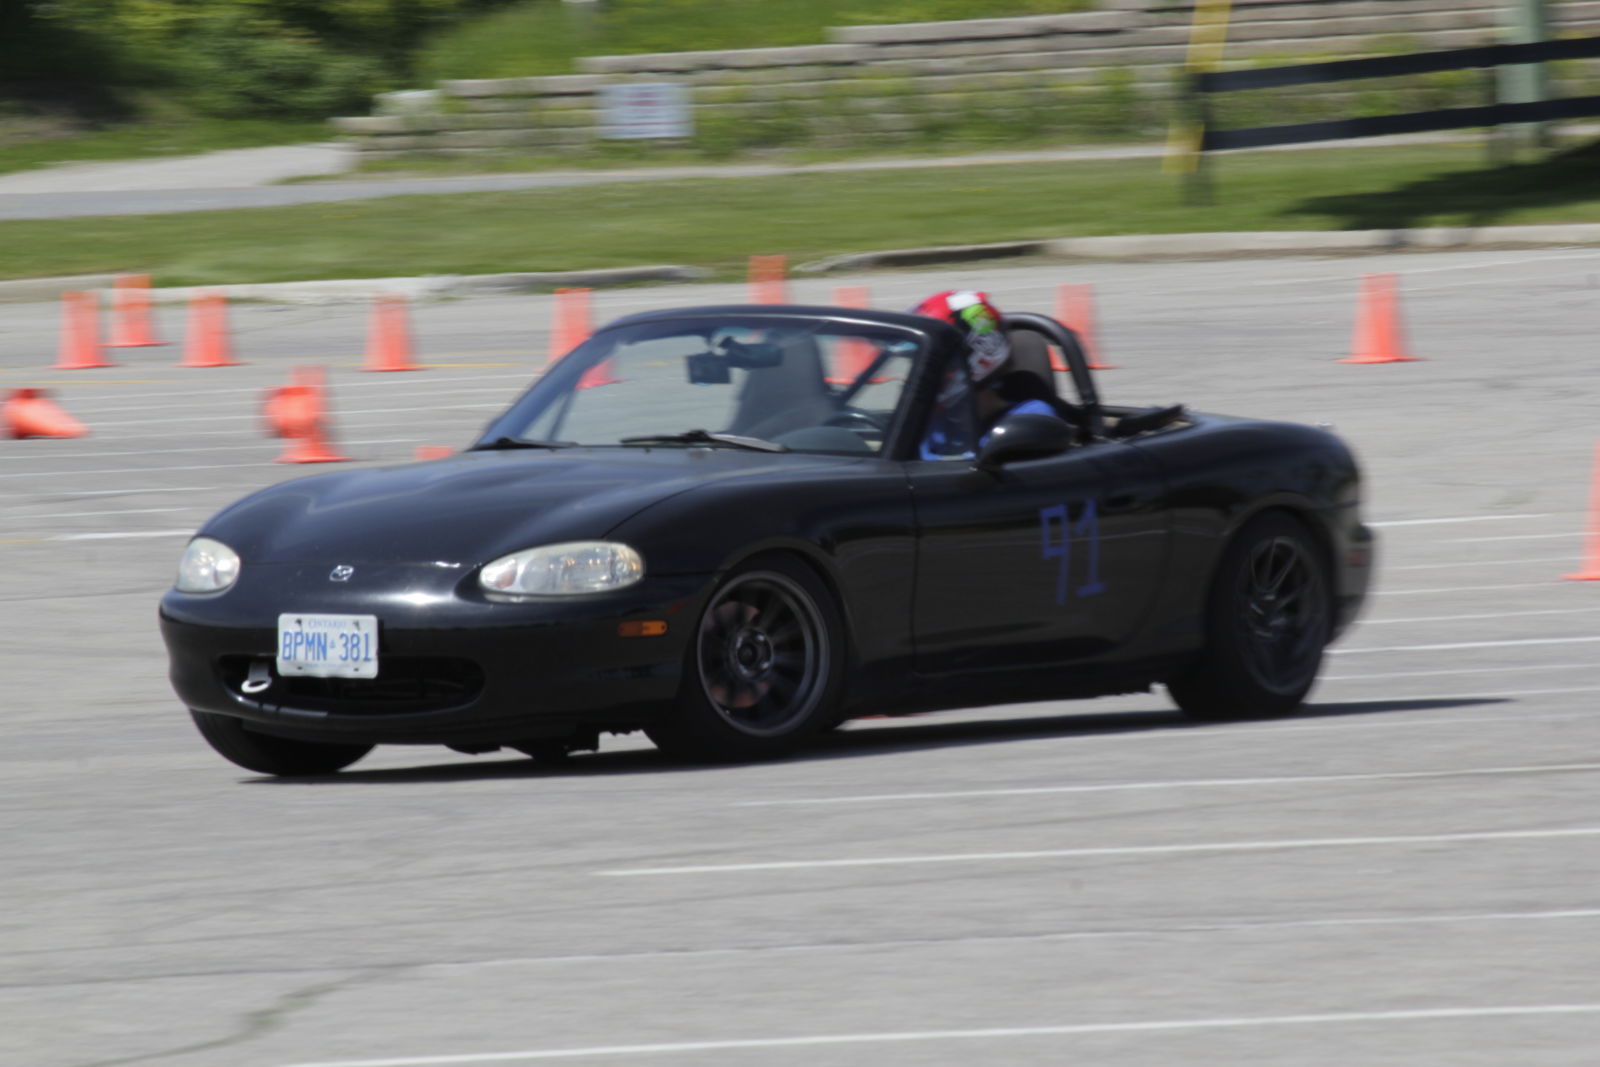 Illustration for article titled Did I mention that I drove a prepped Miata today?